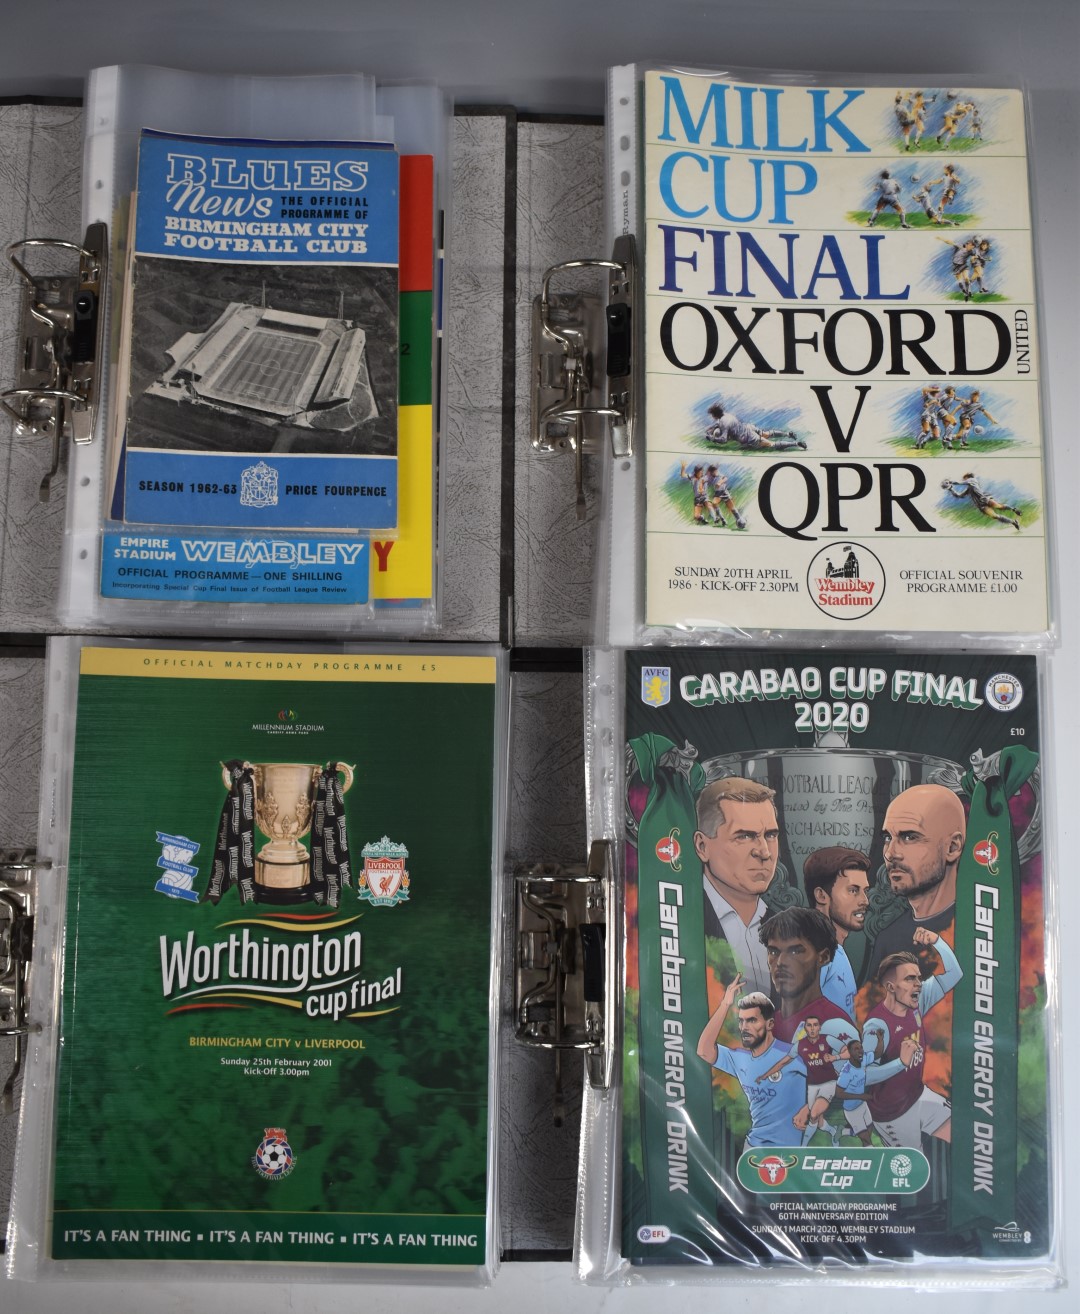 A near complete run of English League Cup football programs dating from 1986-2020